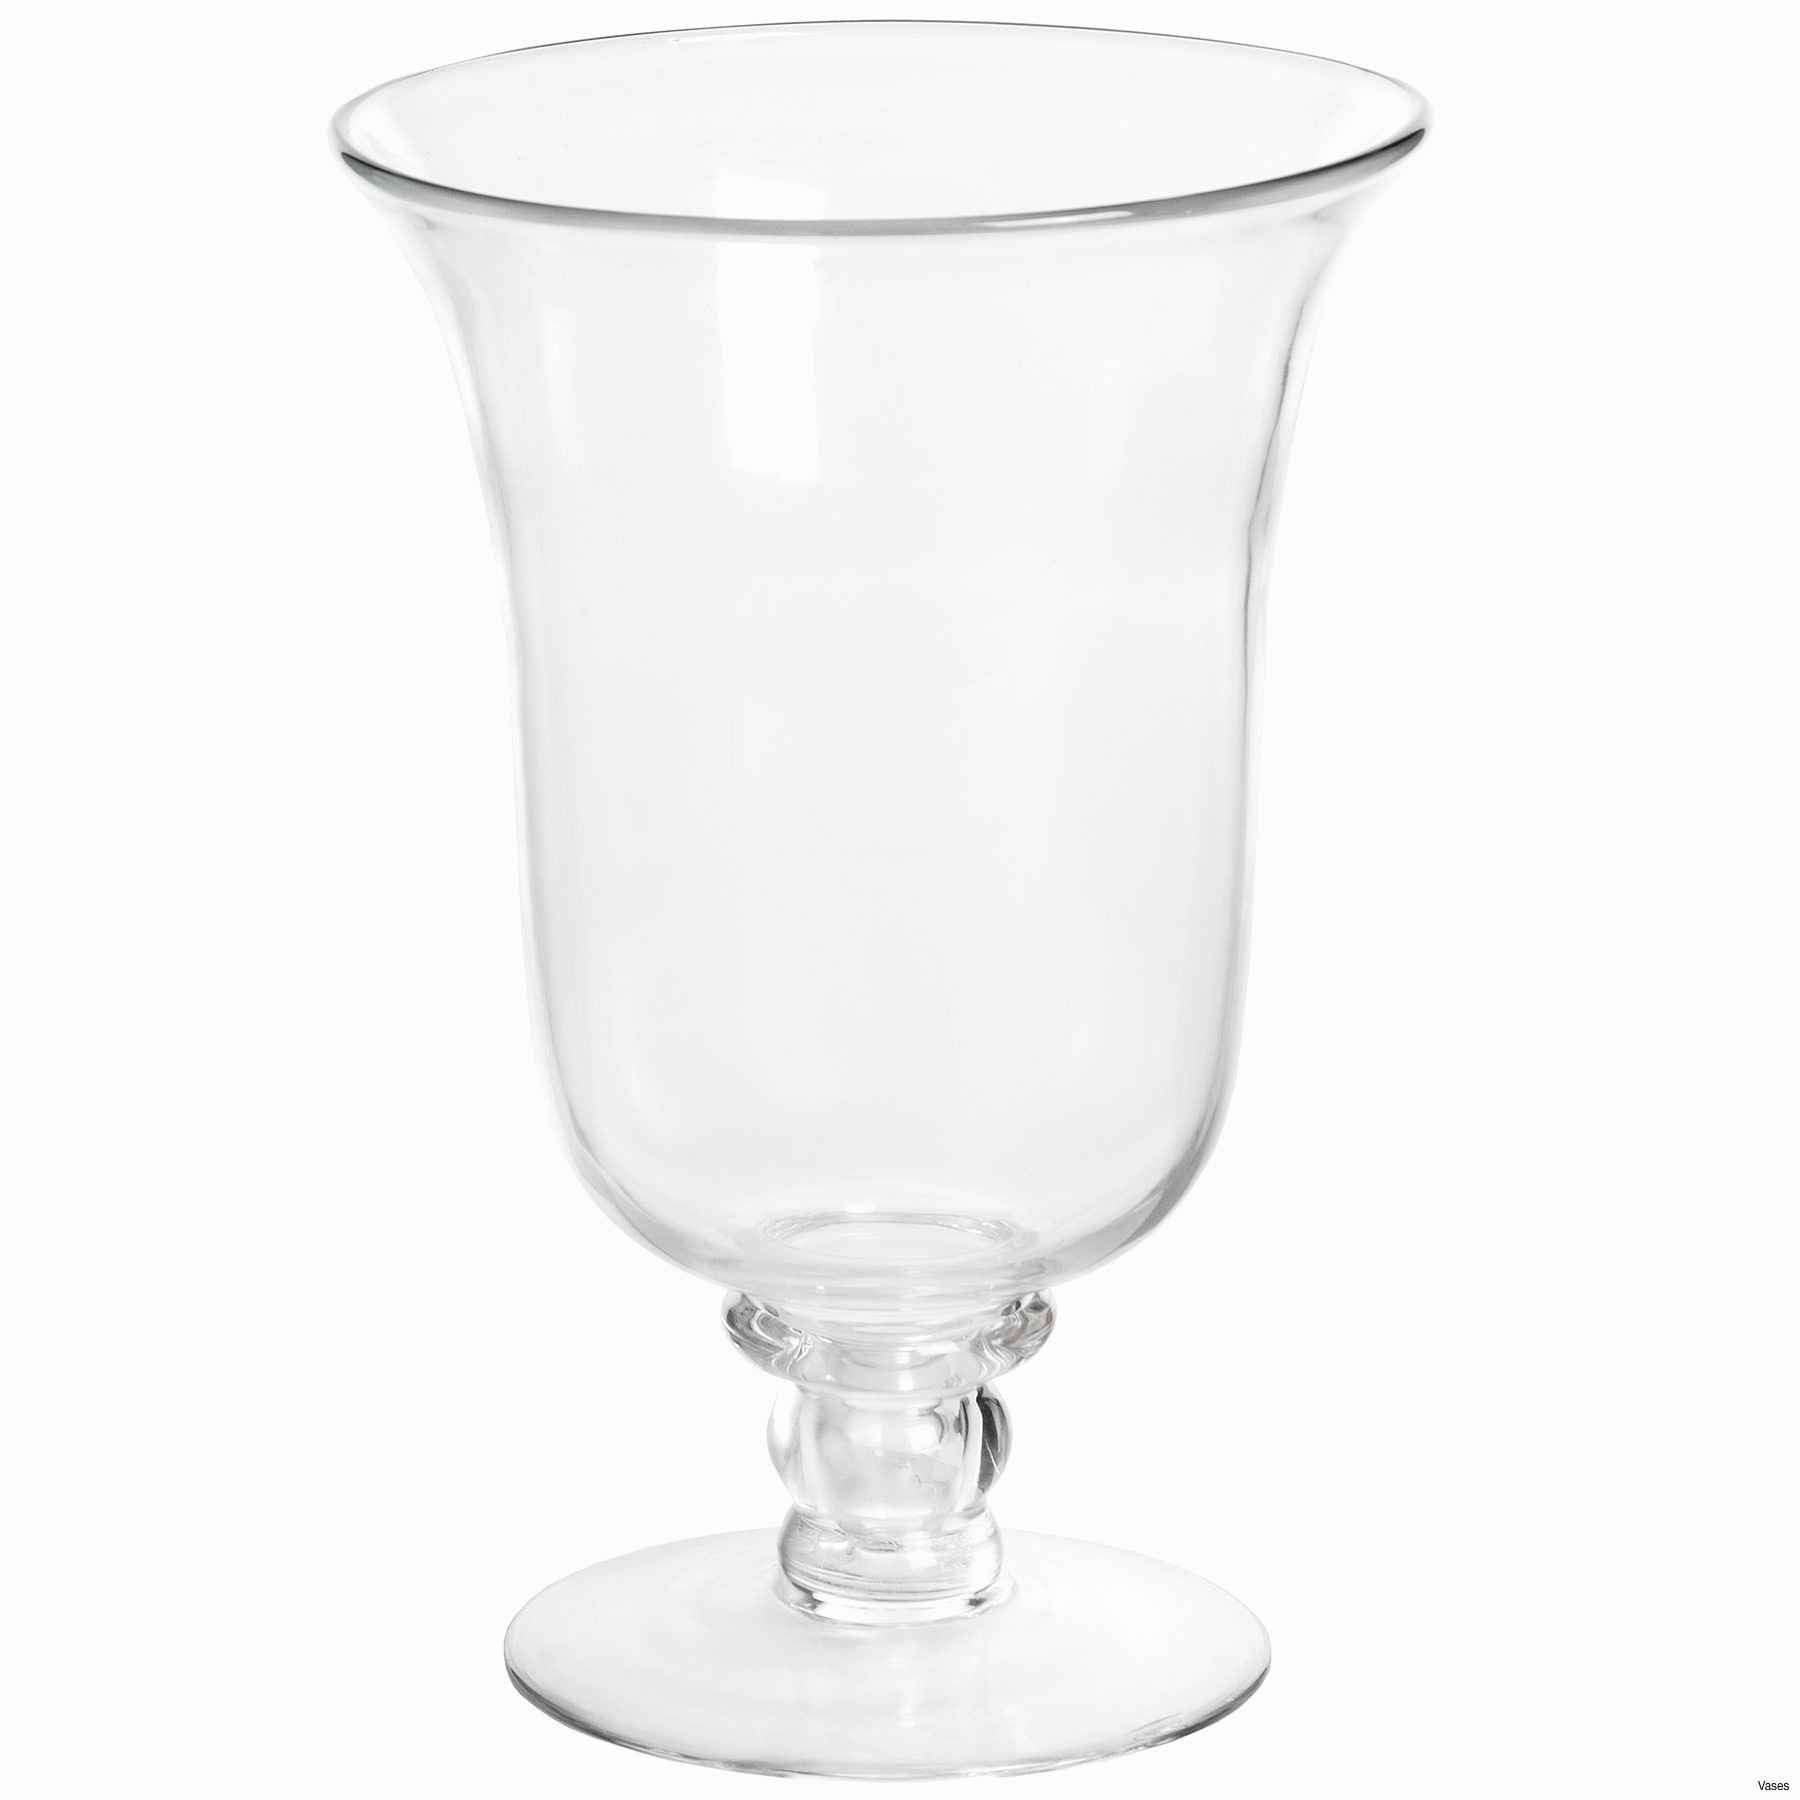 buy glass cylinder vases wholesale of candle stands wholesale lovely faux crystal candle holders alive for candle stands wholesale lovely faux crystal candle holders alive vases gold tall jpgi 0d cheap in